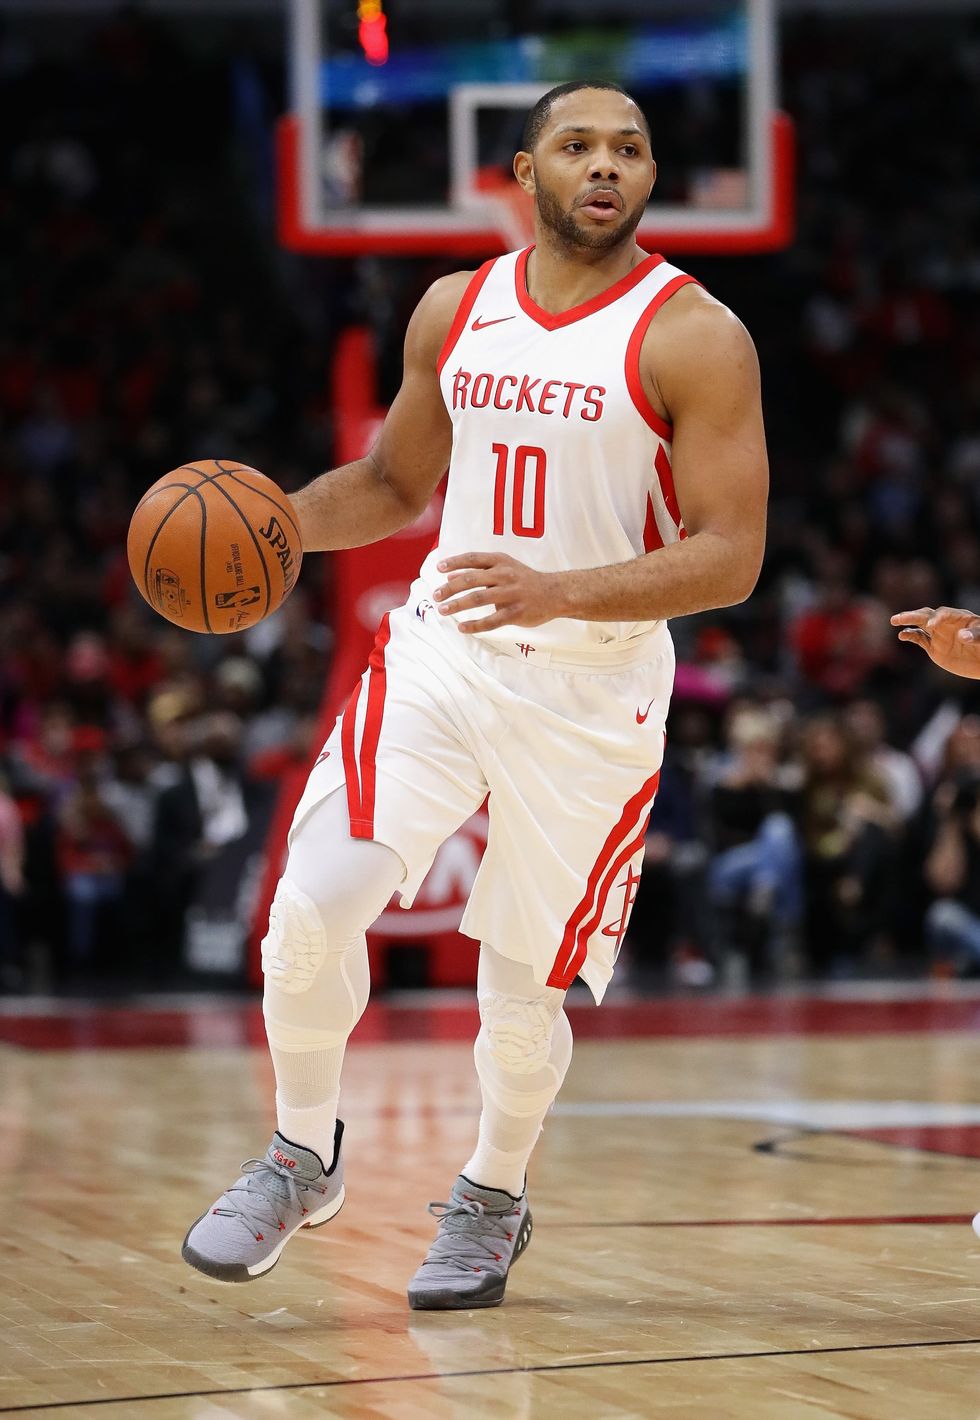 Fred Faour: 5 observations from the Rockets Game 2 win over Golden State